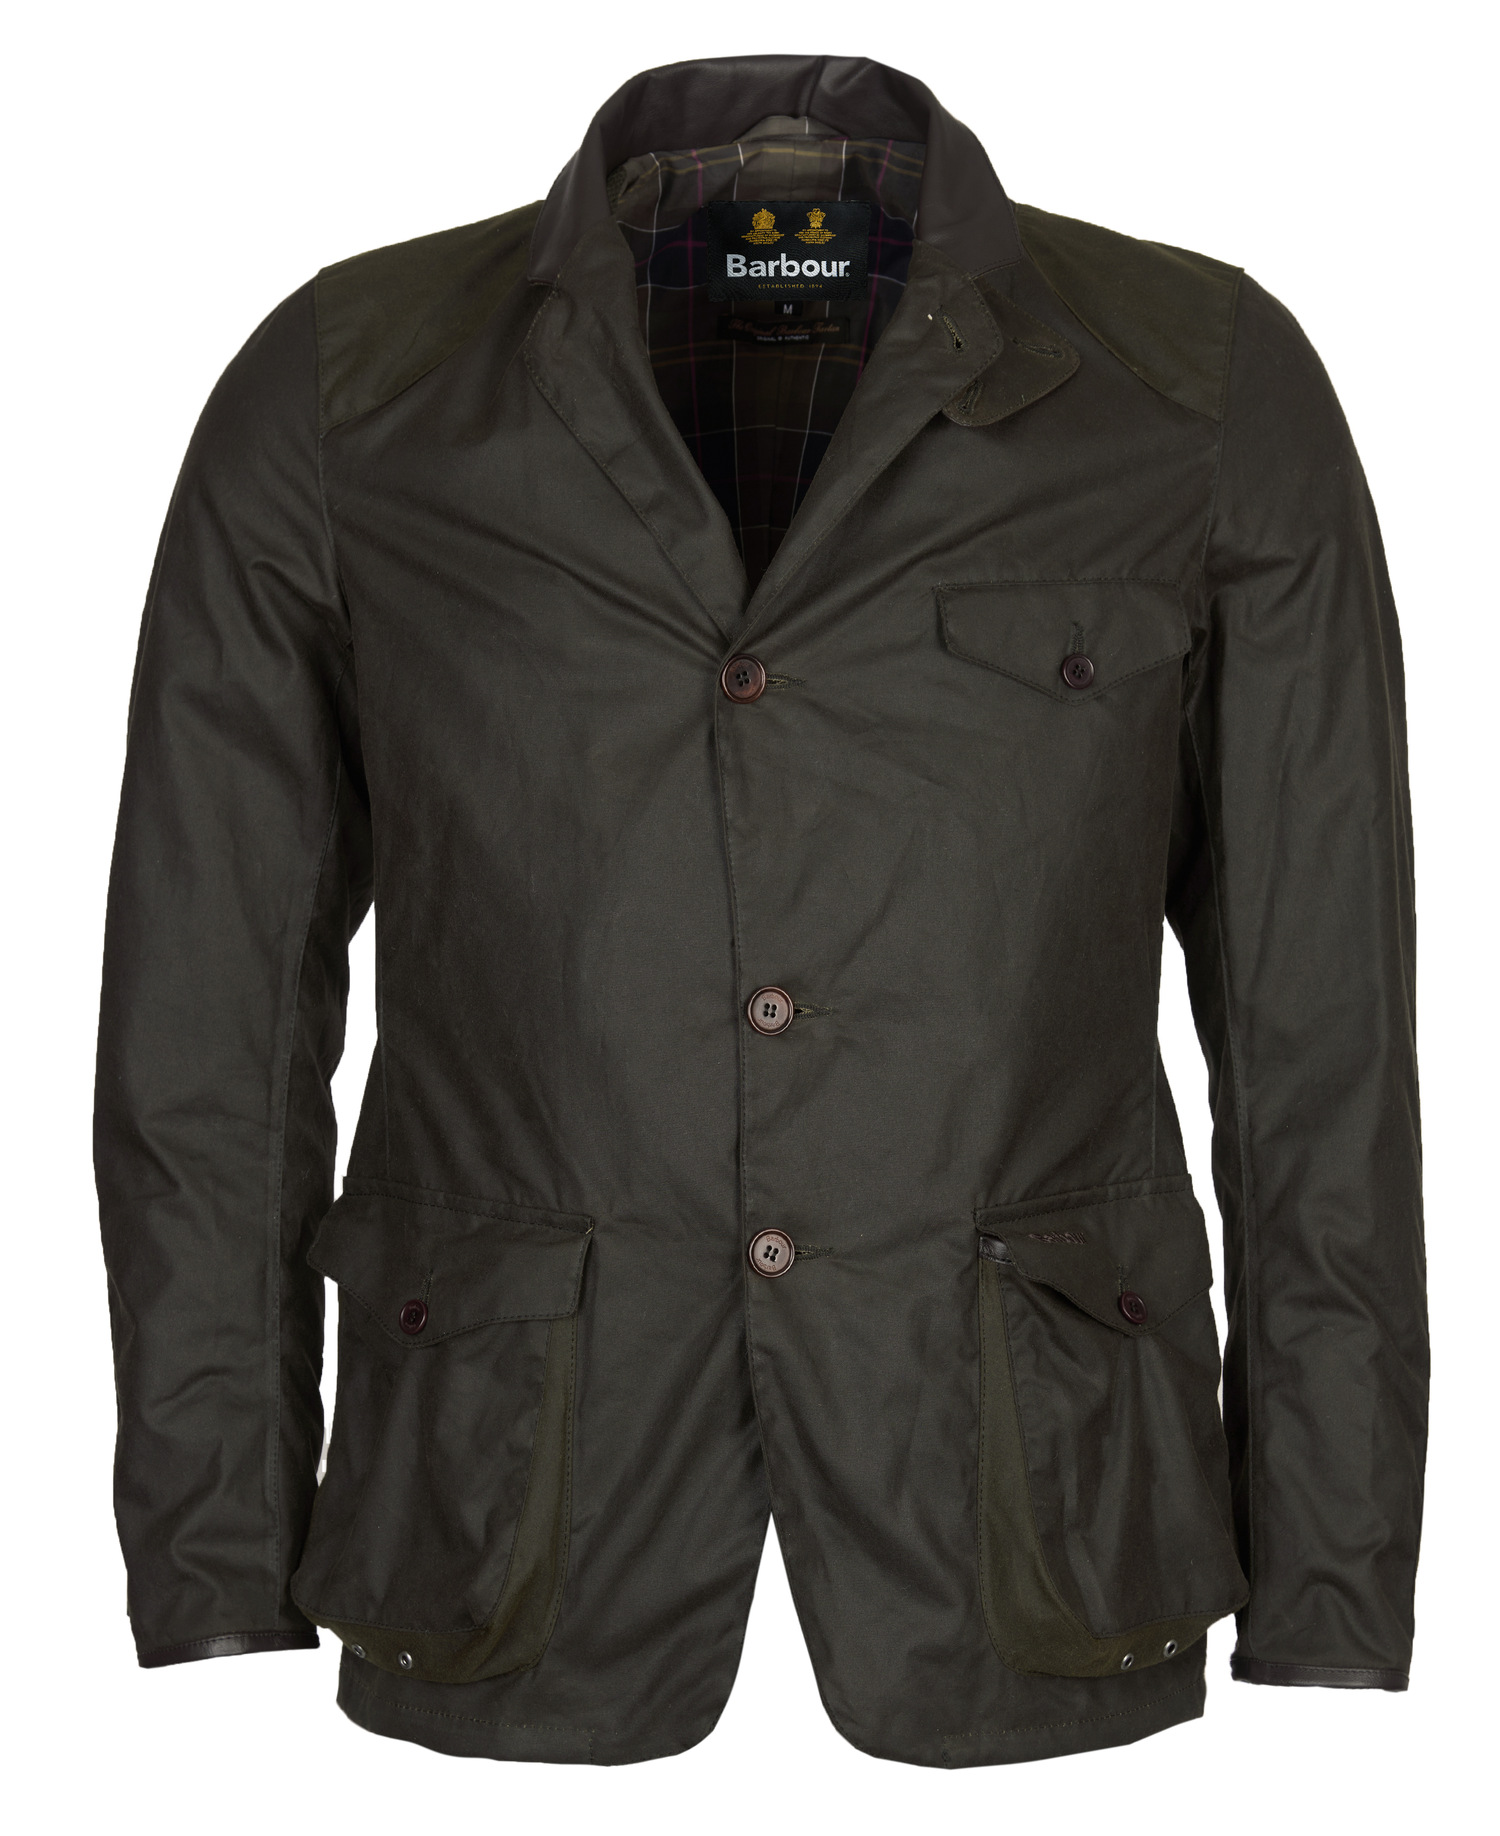 Barbour Beacon Sports Jacket in Olive Barbour